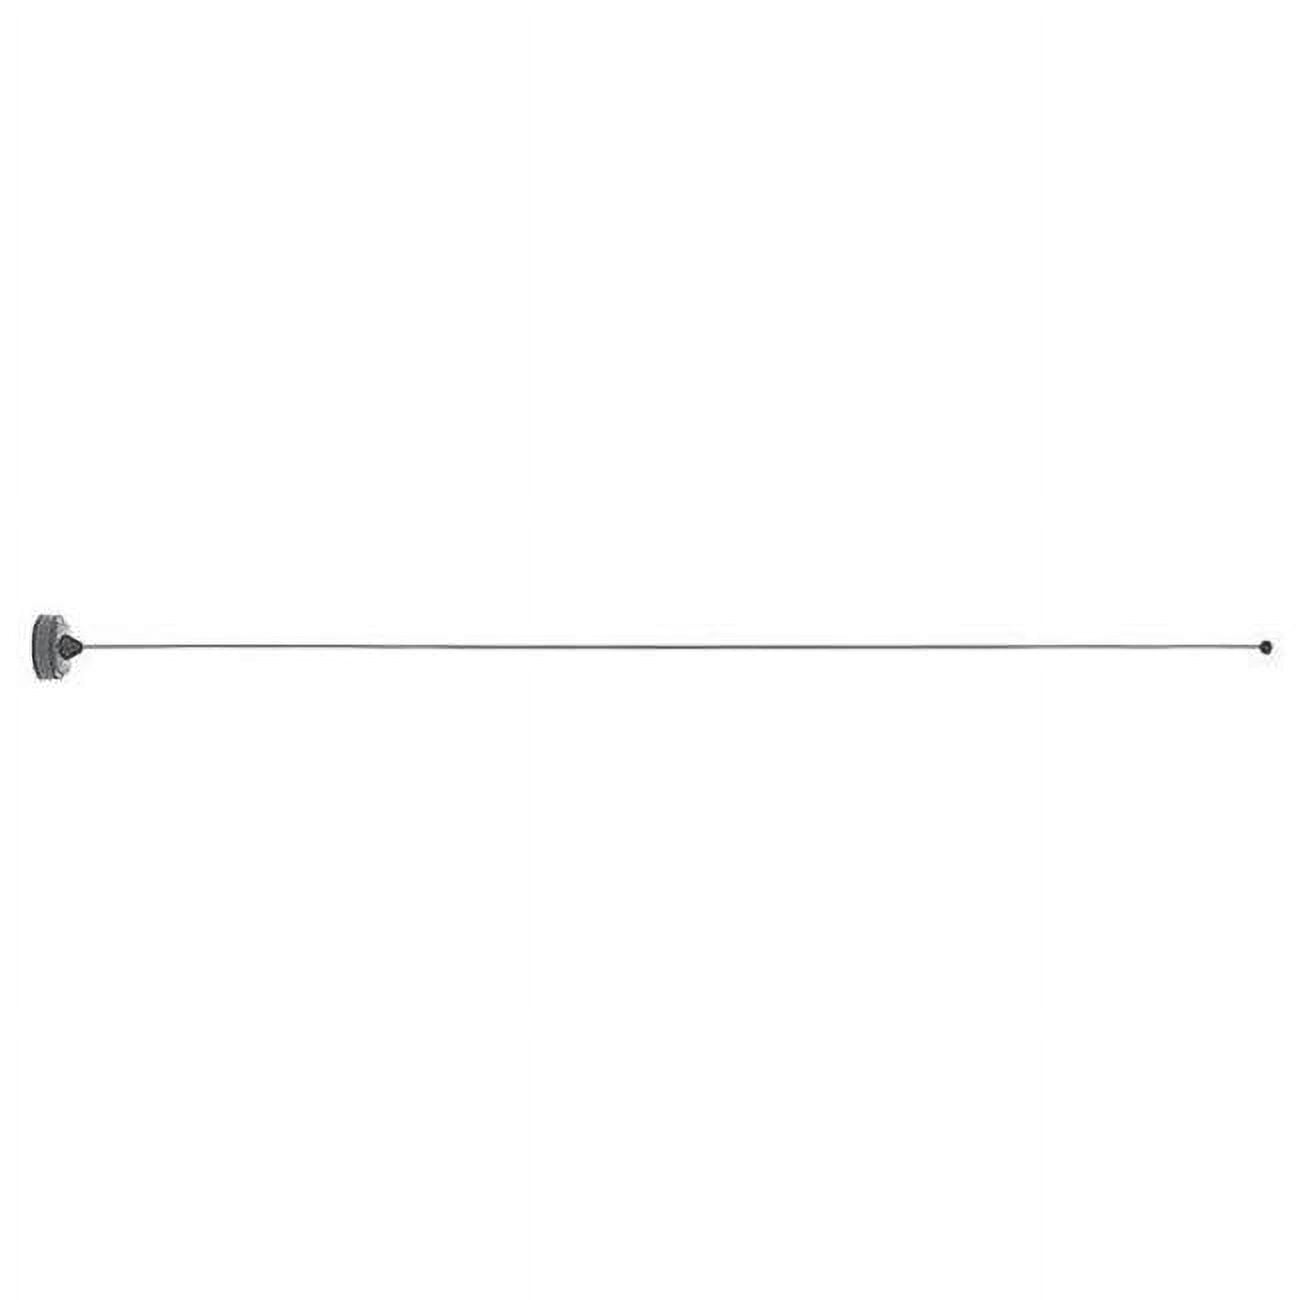 Picture of PCTEL-Maxrad MFT120 50 watt 118-512MHz Field Tuneable 1 by 4 Wave Unity Gain Antenna